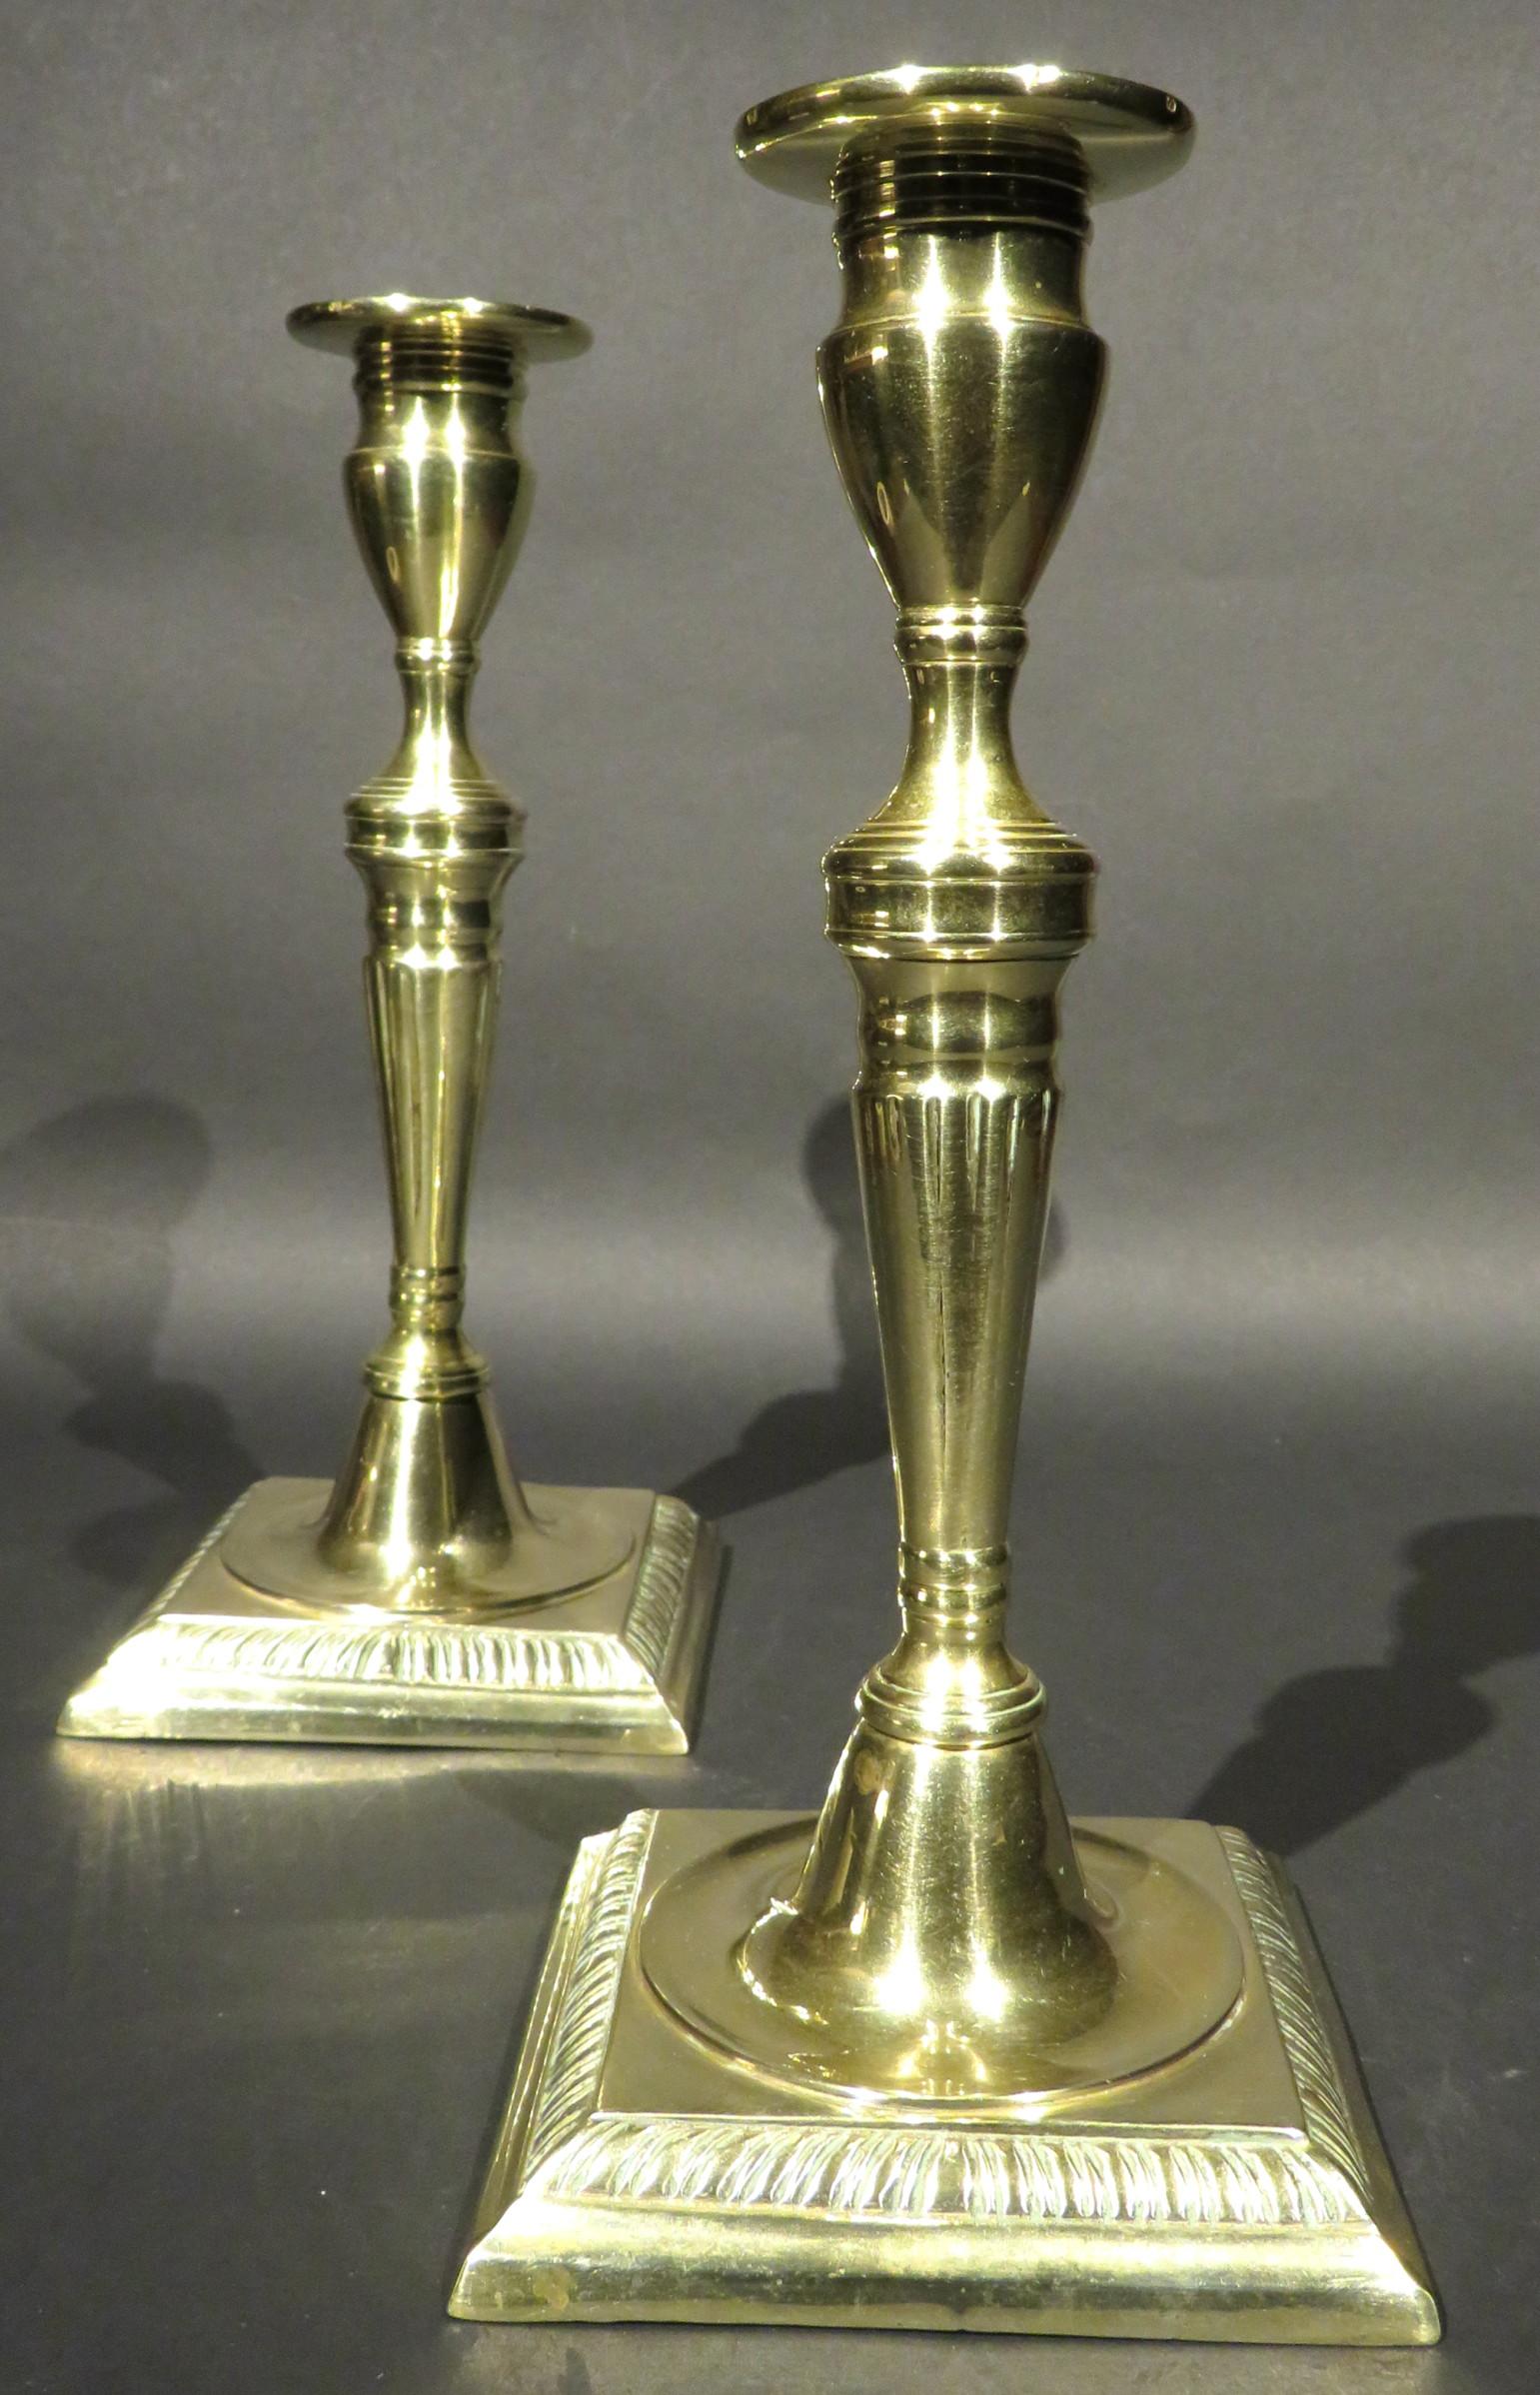 A very good pair of 18th century George III brass candlesticks, both showing fluted tapering columns rising to tulip shaped nozzles with flattened drip pans, raised on squared bases with chiseled gadroon detail. Both exhibiting a fine patina and an